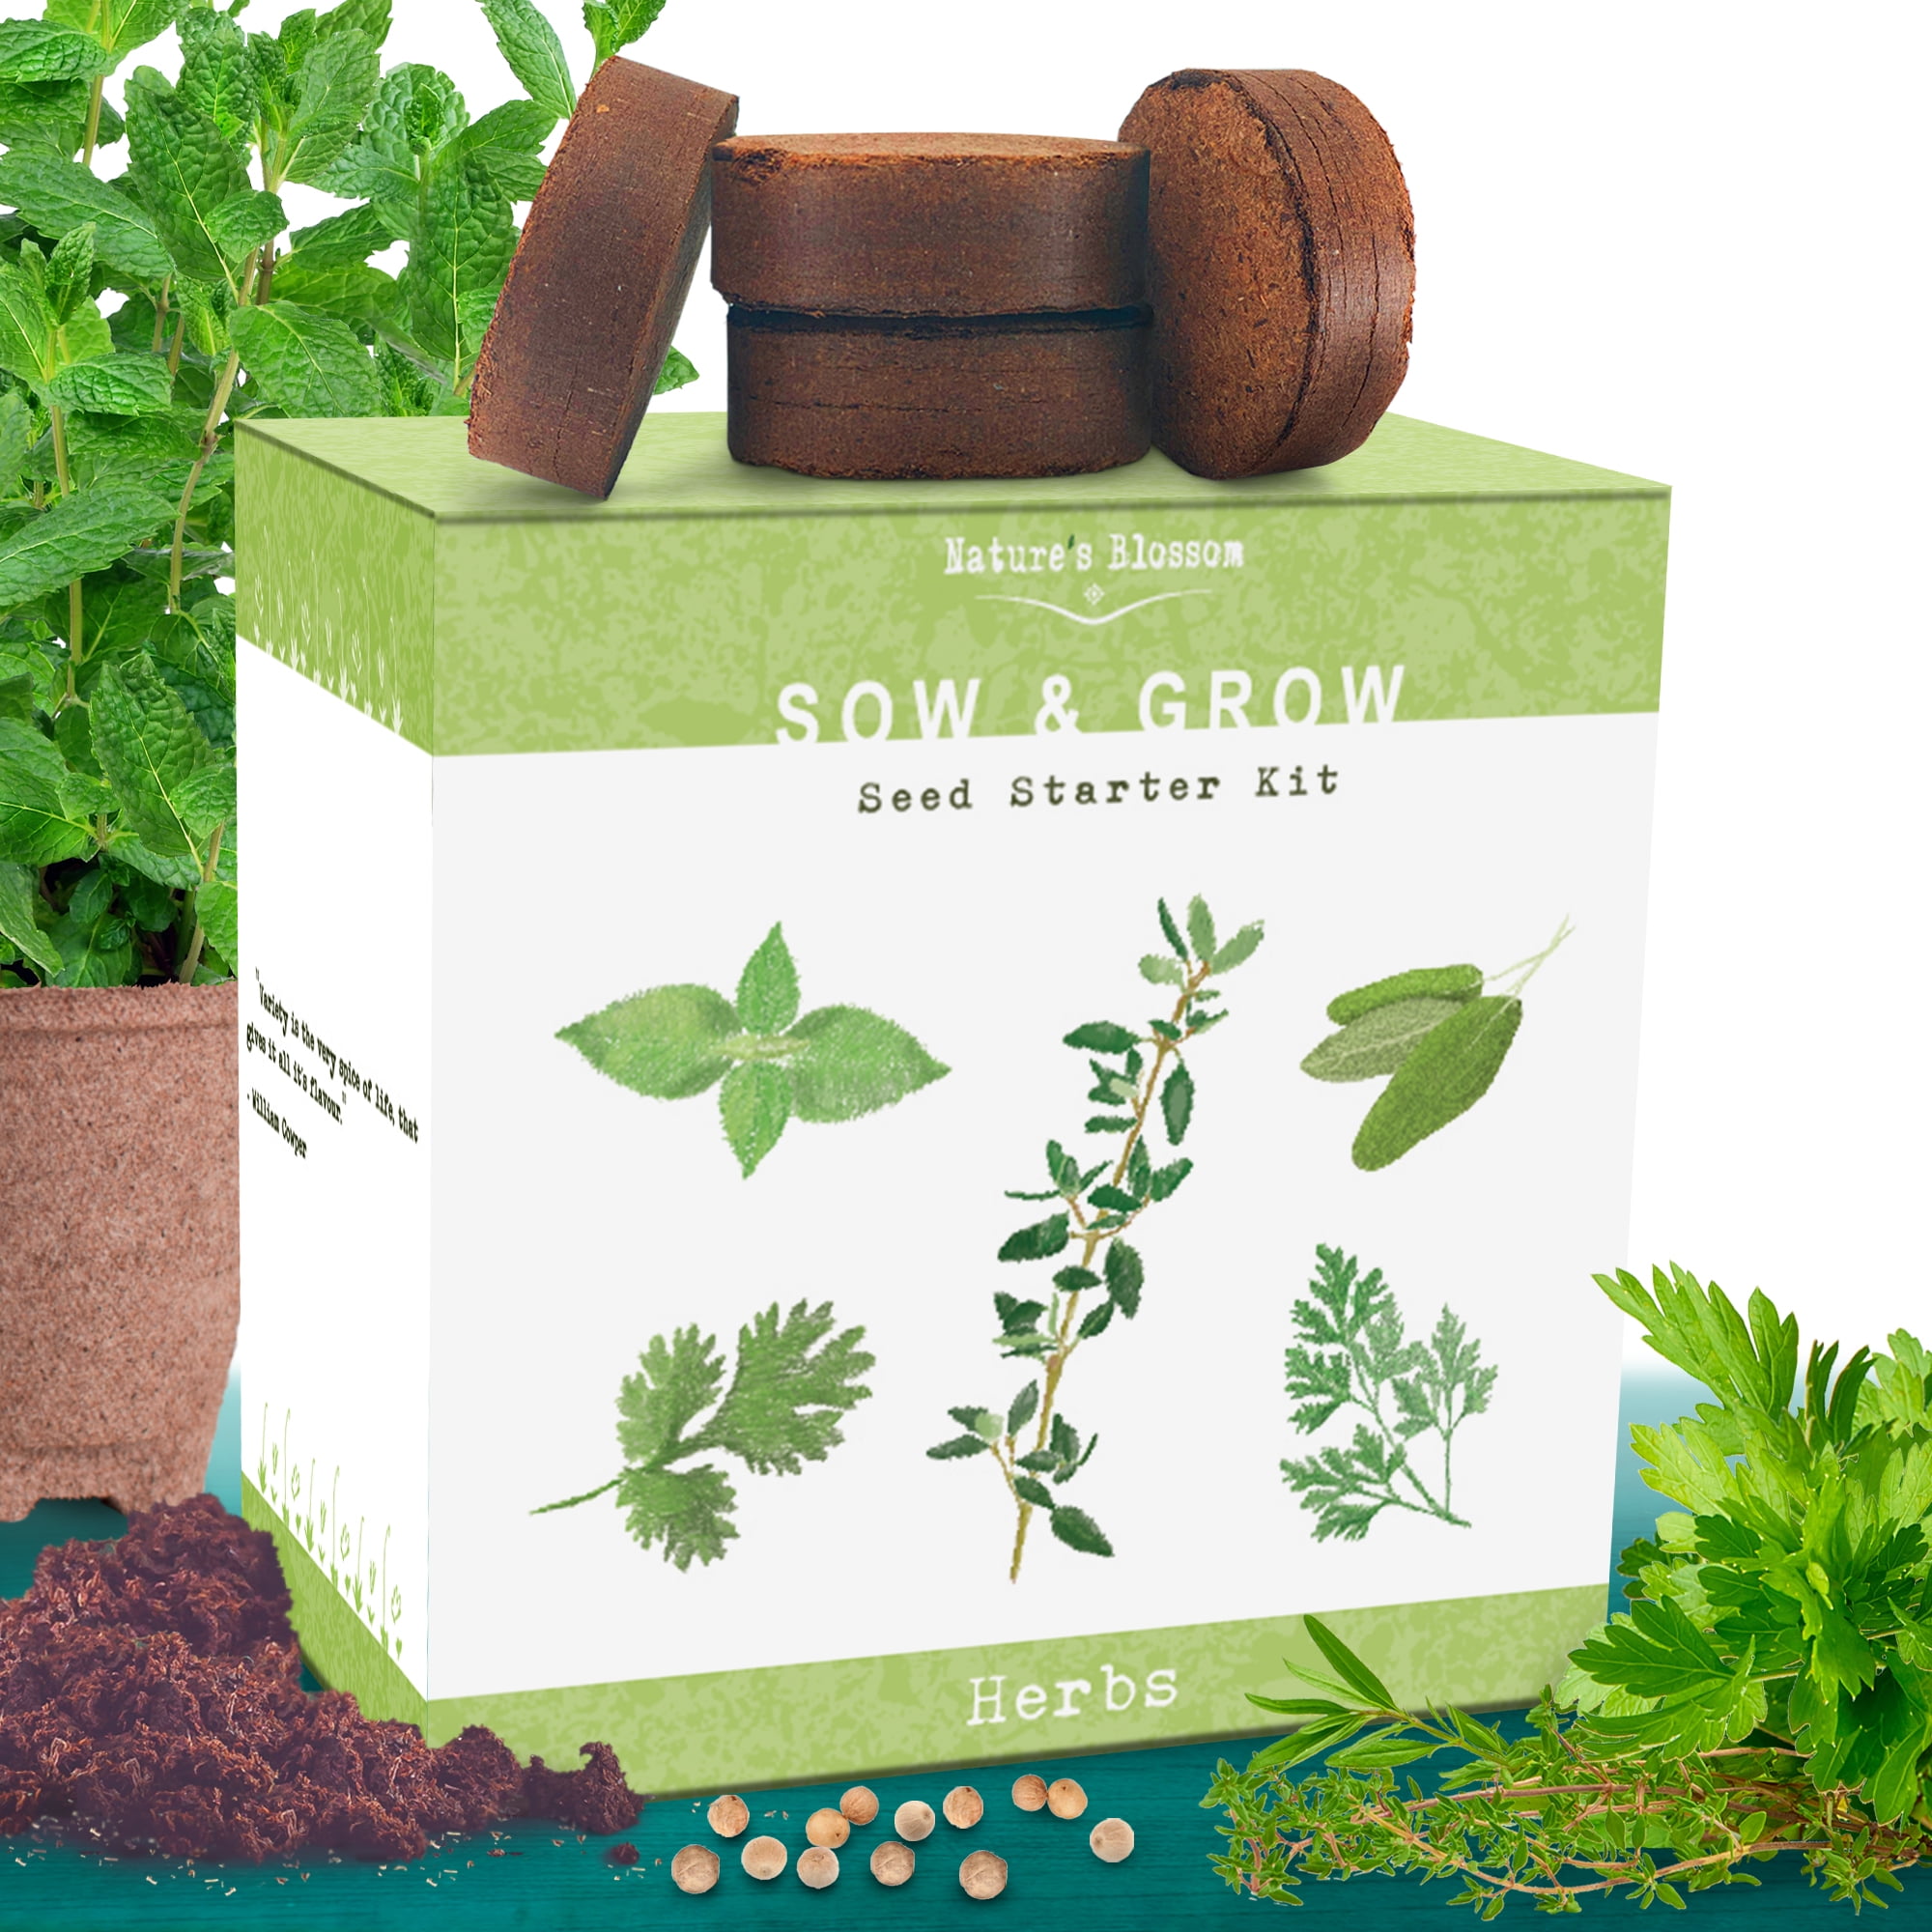 Free Mini-Greenhouse Included Easy to Grow Great Gift Large Grow Your Own Herb Kit 6 Herb Varieties